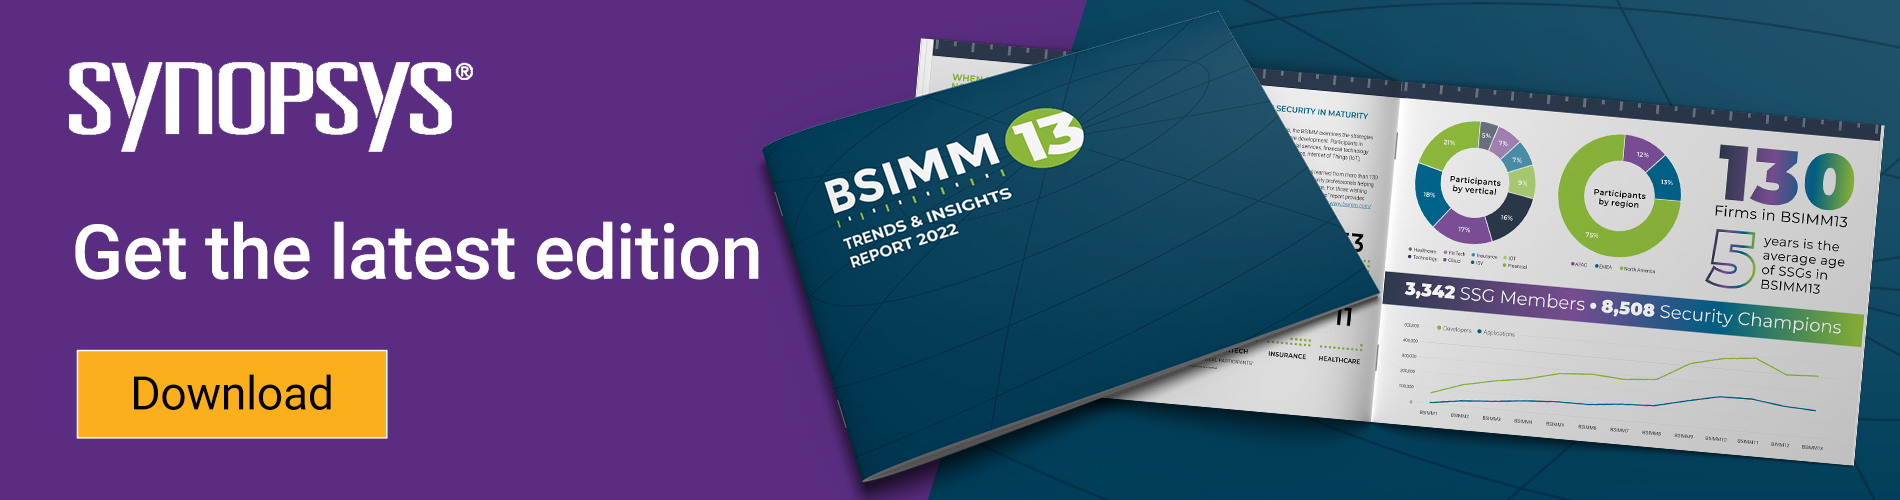 BSIMM13 report | Synopsys